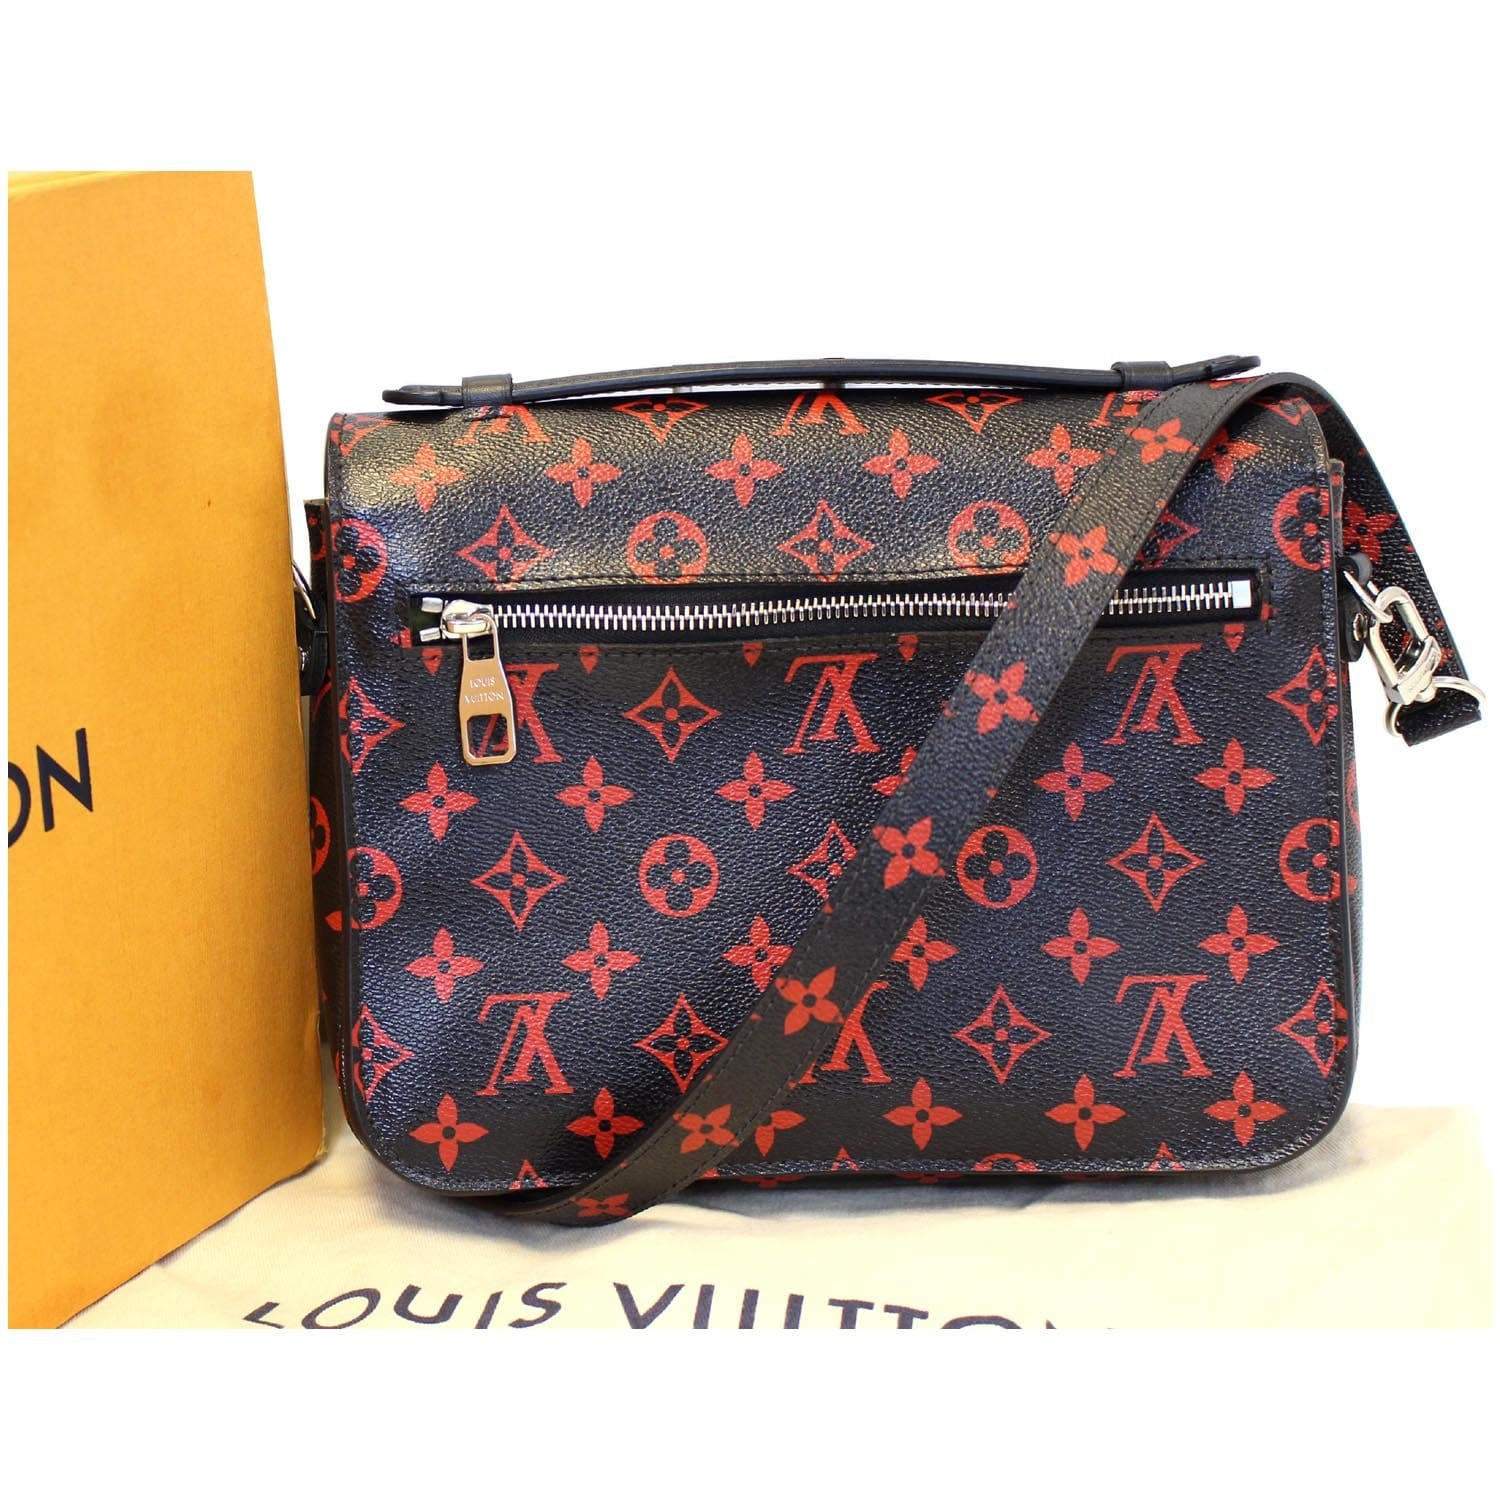 Louis Vuitton - Authenticated Metis Handbag - Leather Red for Women, Good Condition